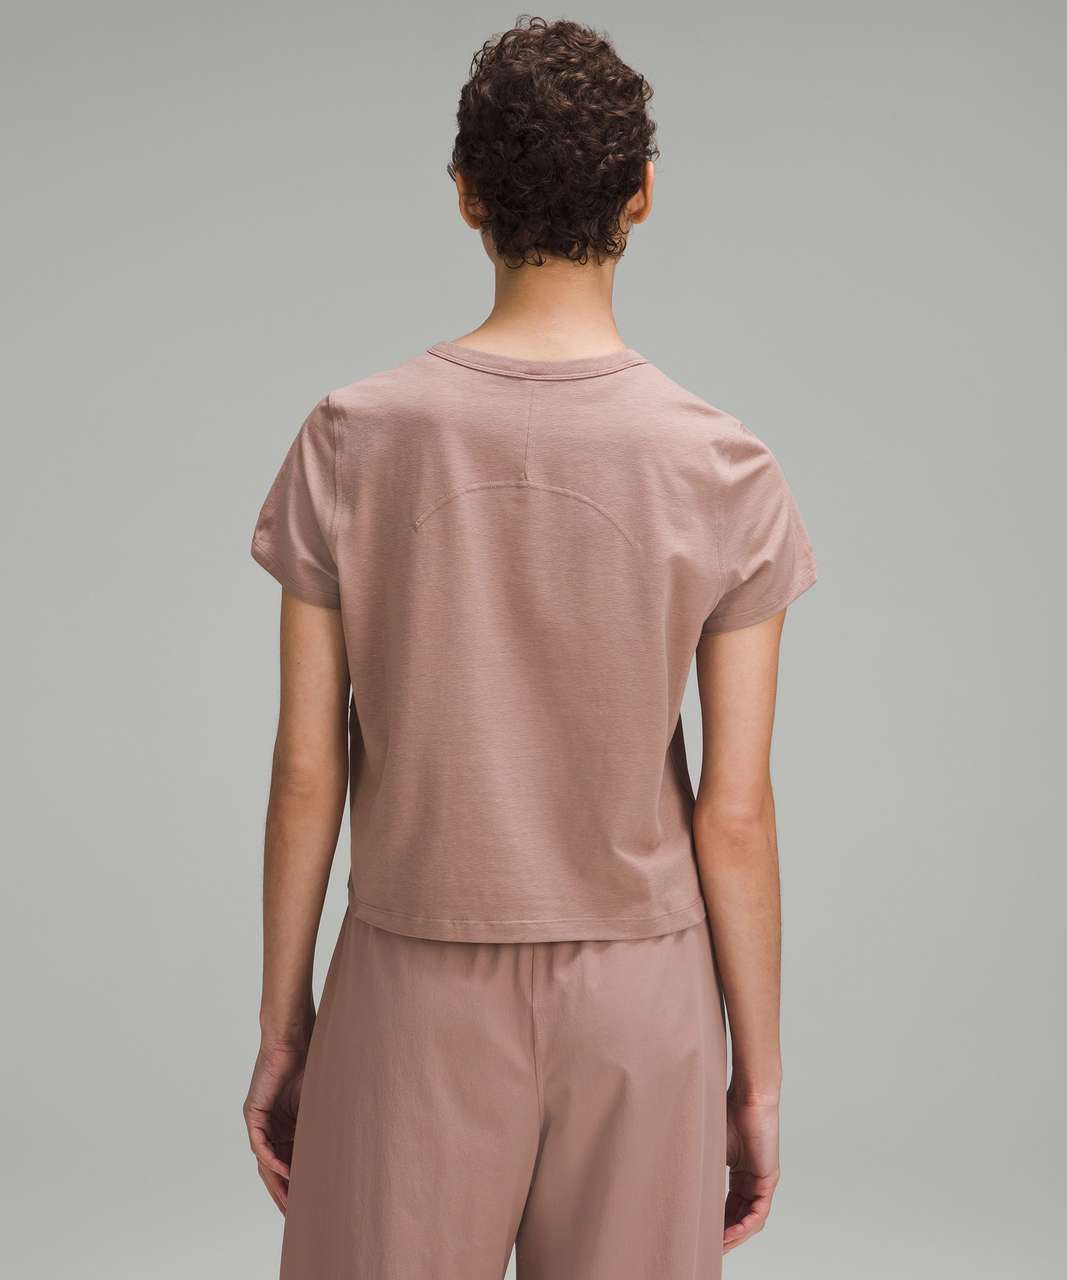 Work fit: Tapered-Leg Mid-Rise Pant 7/8 Length in Espresso and Classic-Fit  Cotton-Blend T-Shirt in Twilight Rose : r/lululemon